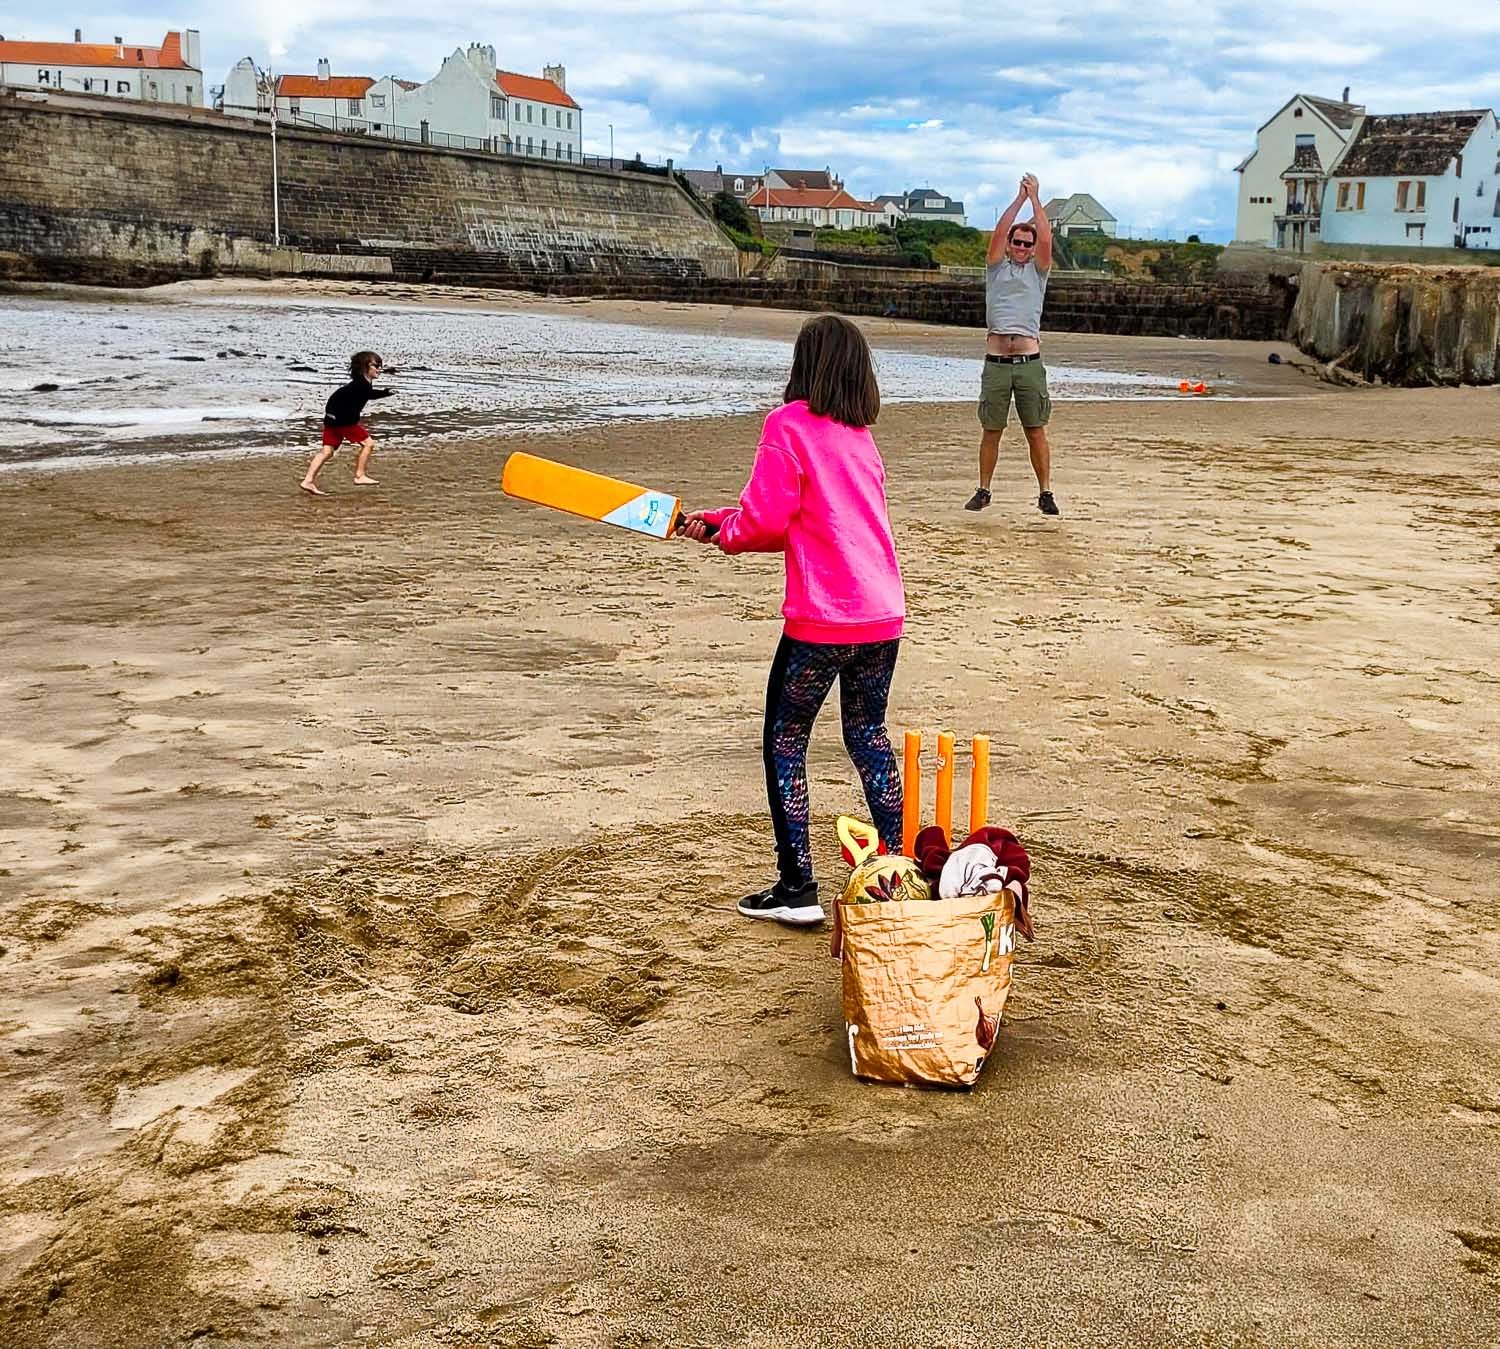 A family of three playing cricket on the beach